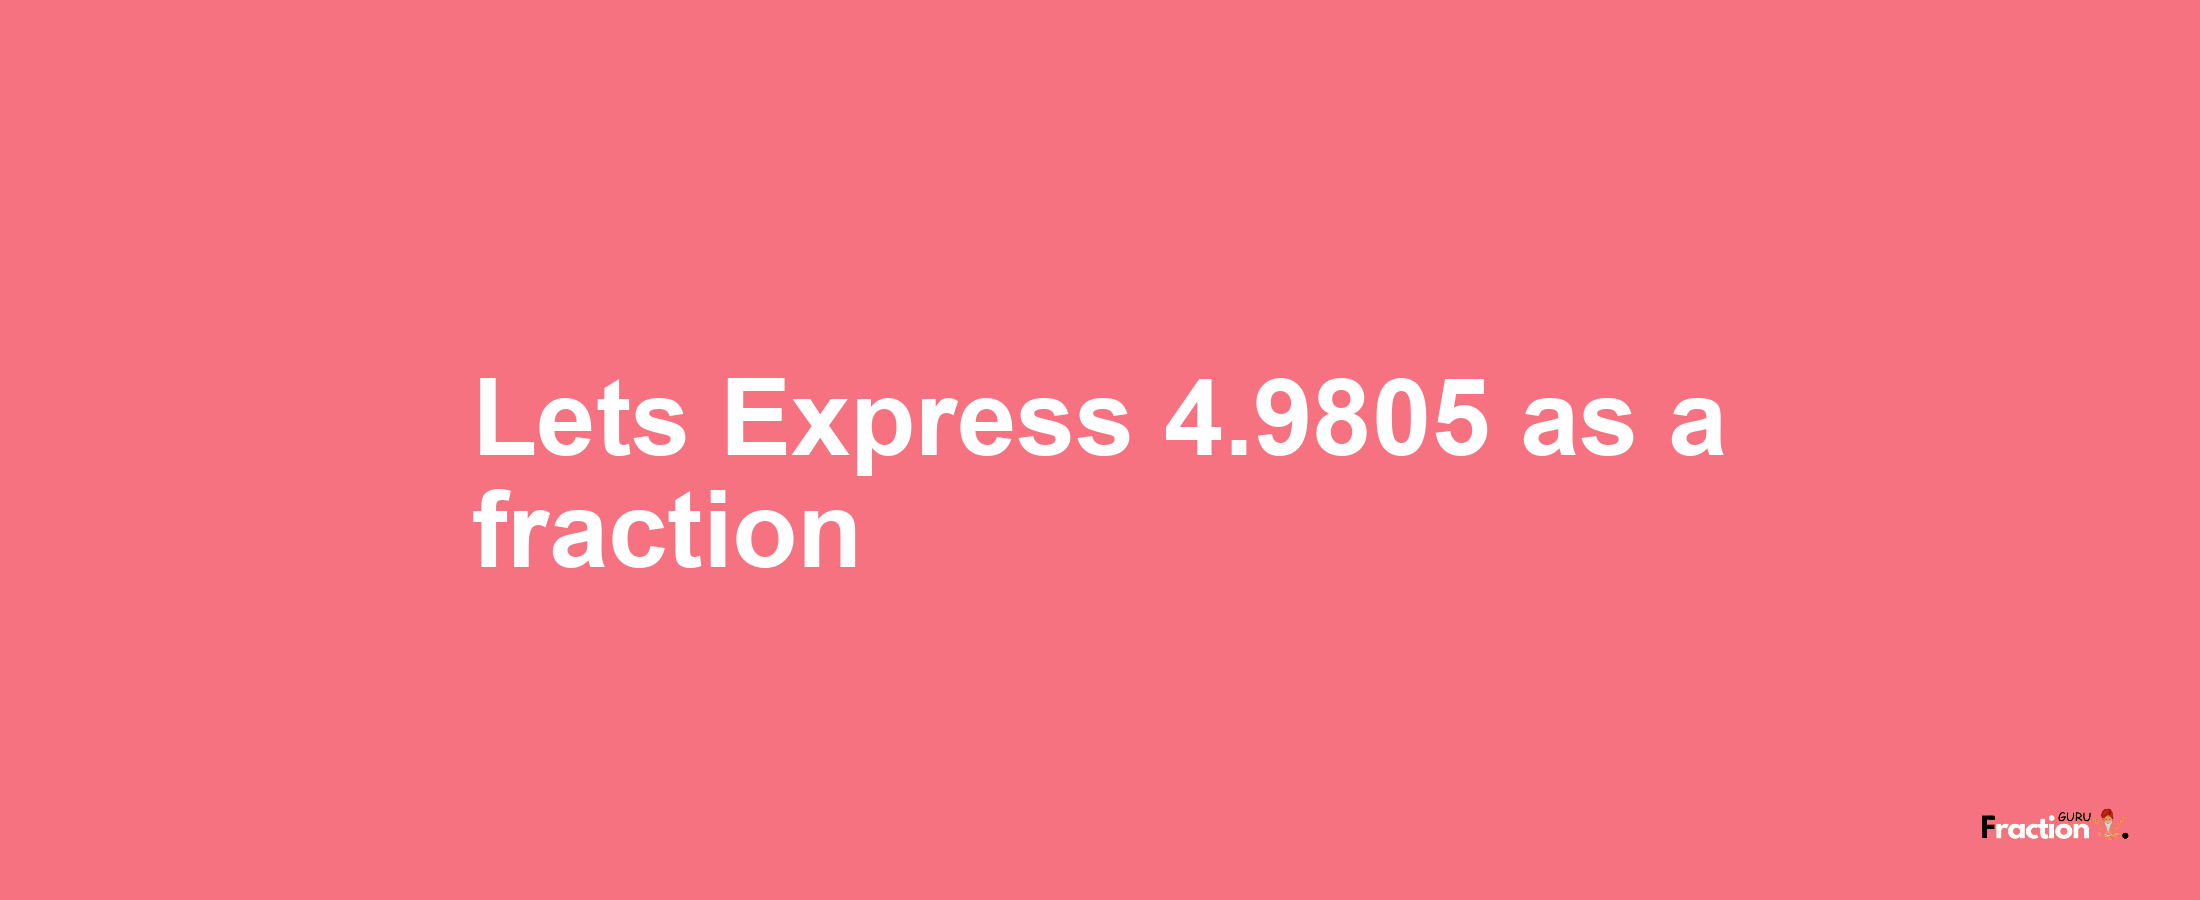 Lets Express 4.9805 as afraction